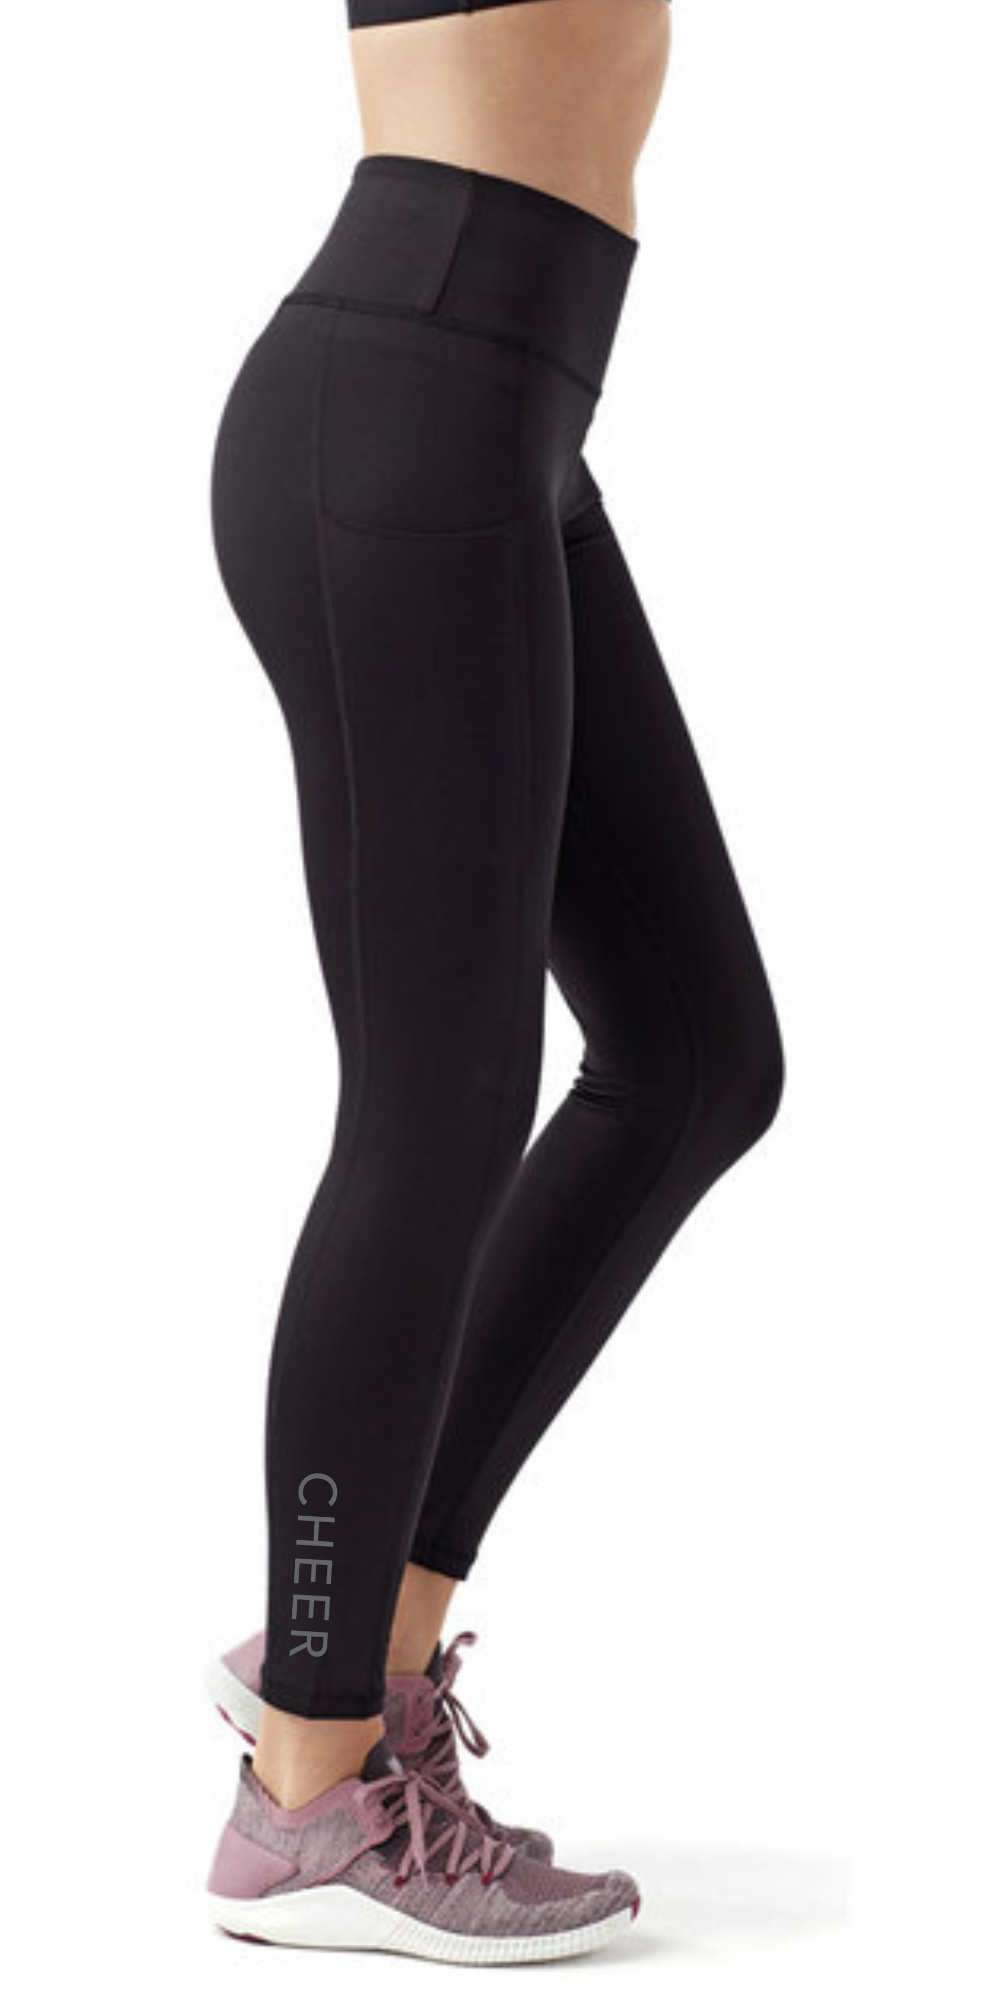 LORNA JANE ULTIMATE SUPPORT FULL LENGTH TIGHT WOMENS